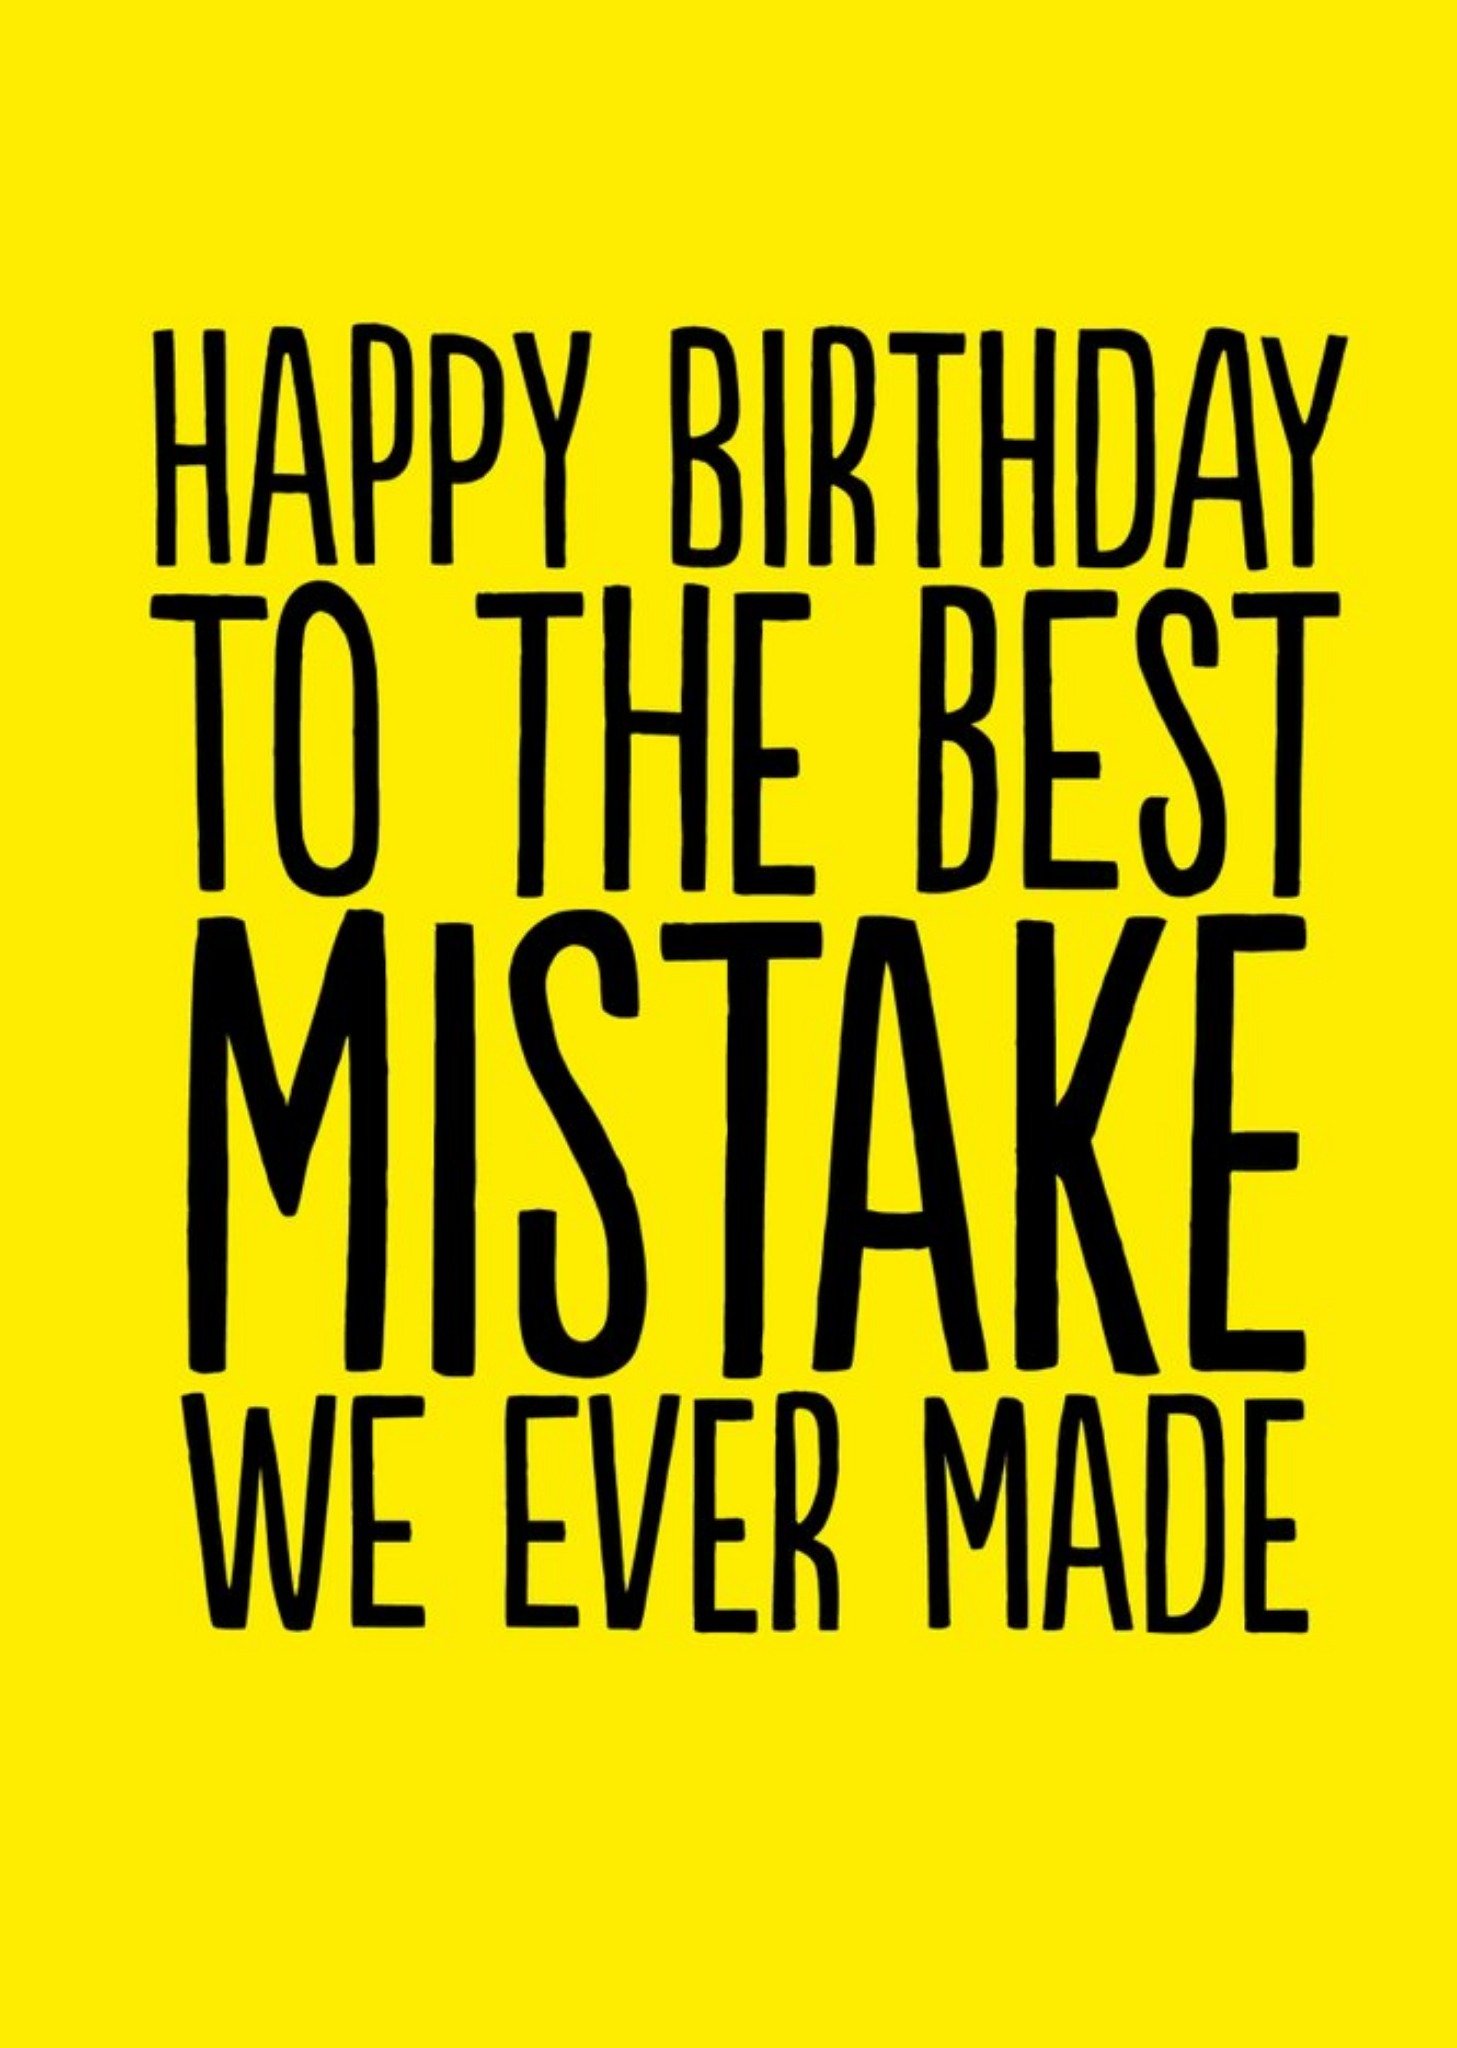 Moonpig Funny Happy Birthday To The Best Mistake We Ever Made Card, Large